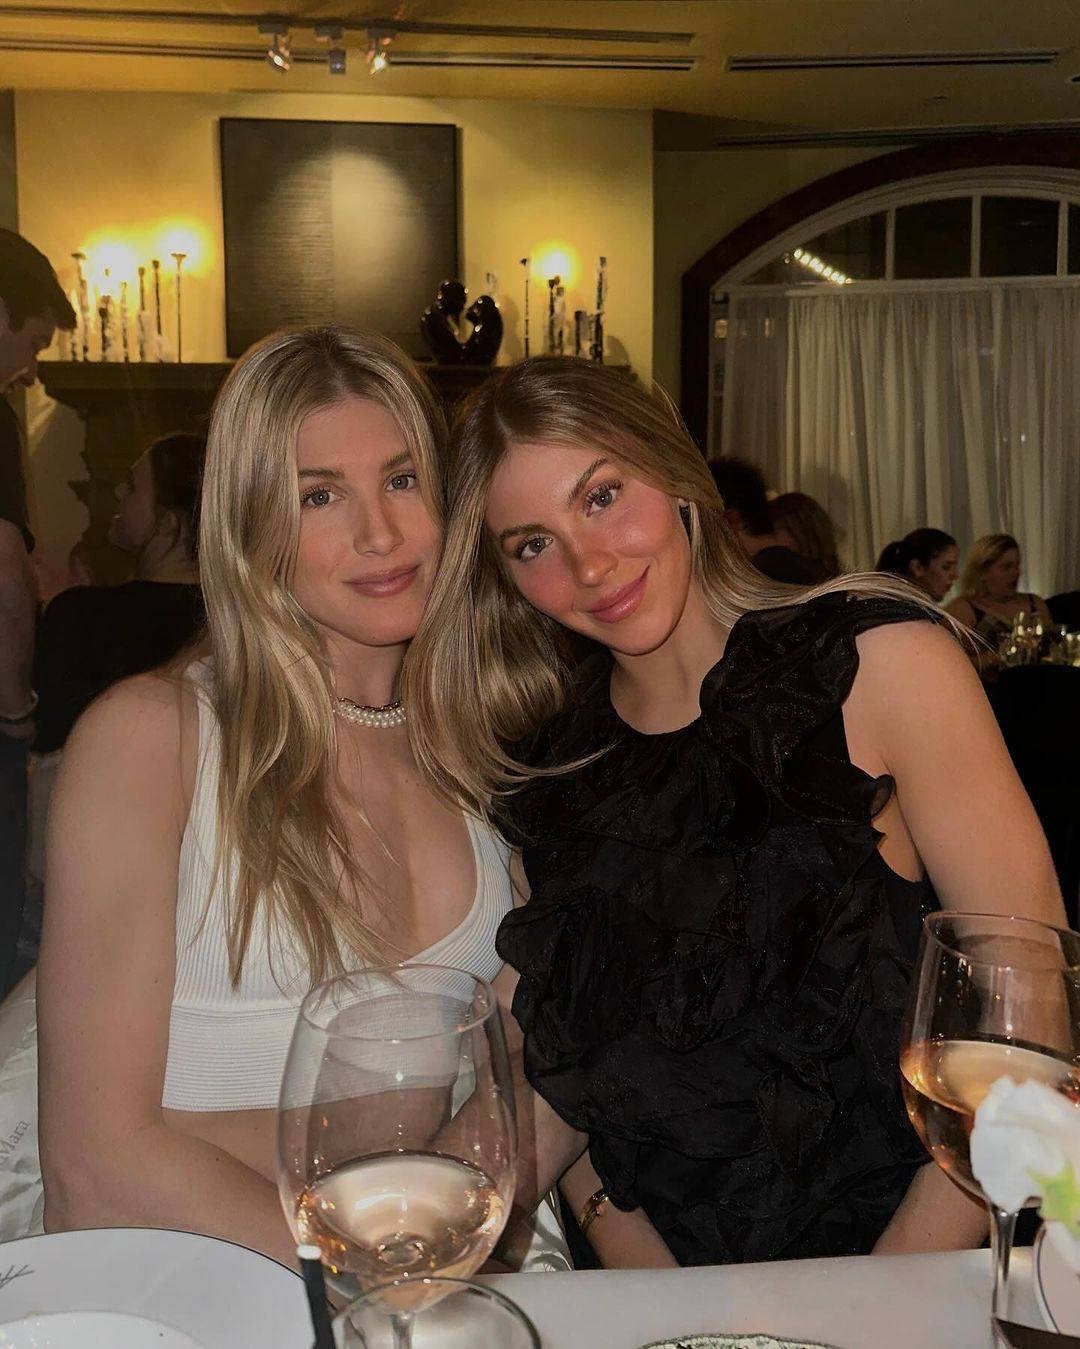 Beatrice Bouchard celebrates her 30th birthday with sister Eugenie Bouchard at The Snow Lodge in Aspen. Photo: @beatricebouchard/Instagram